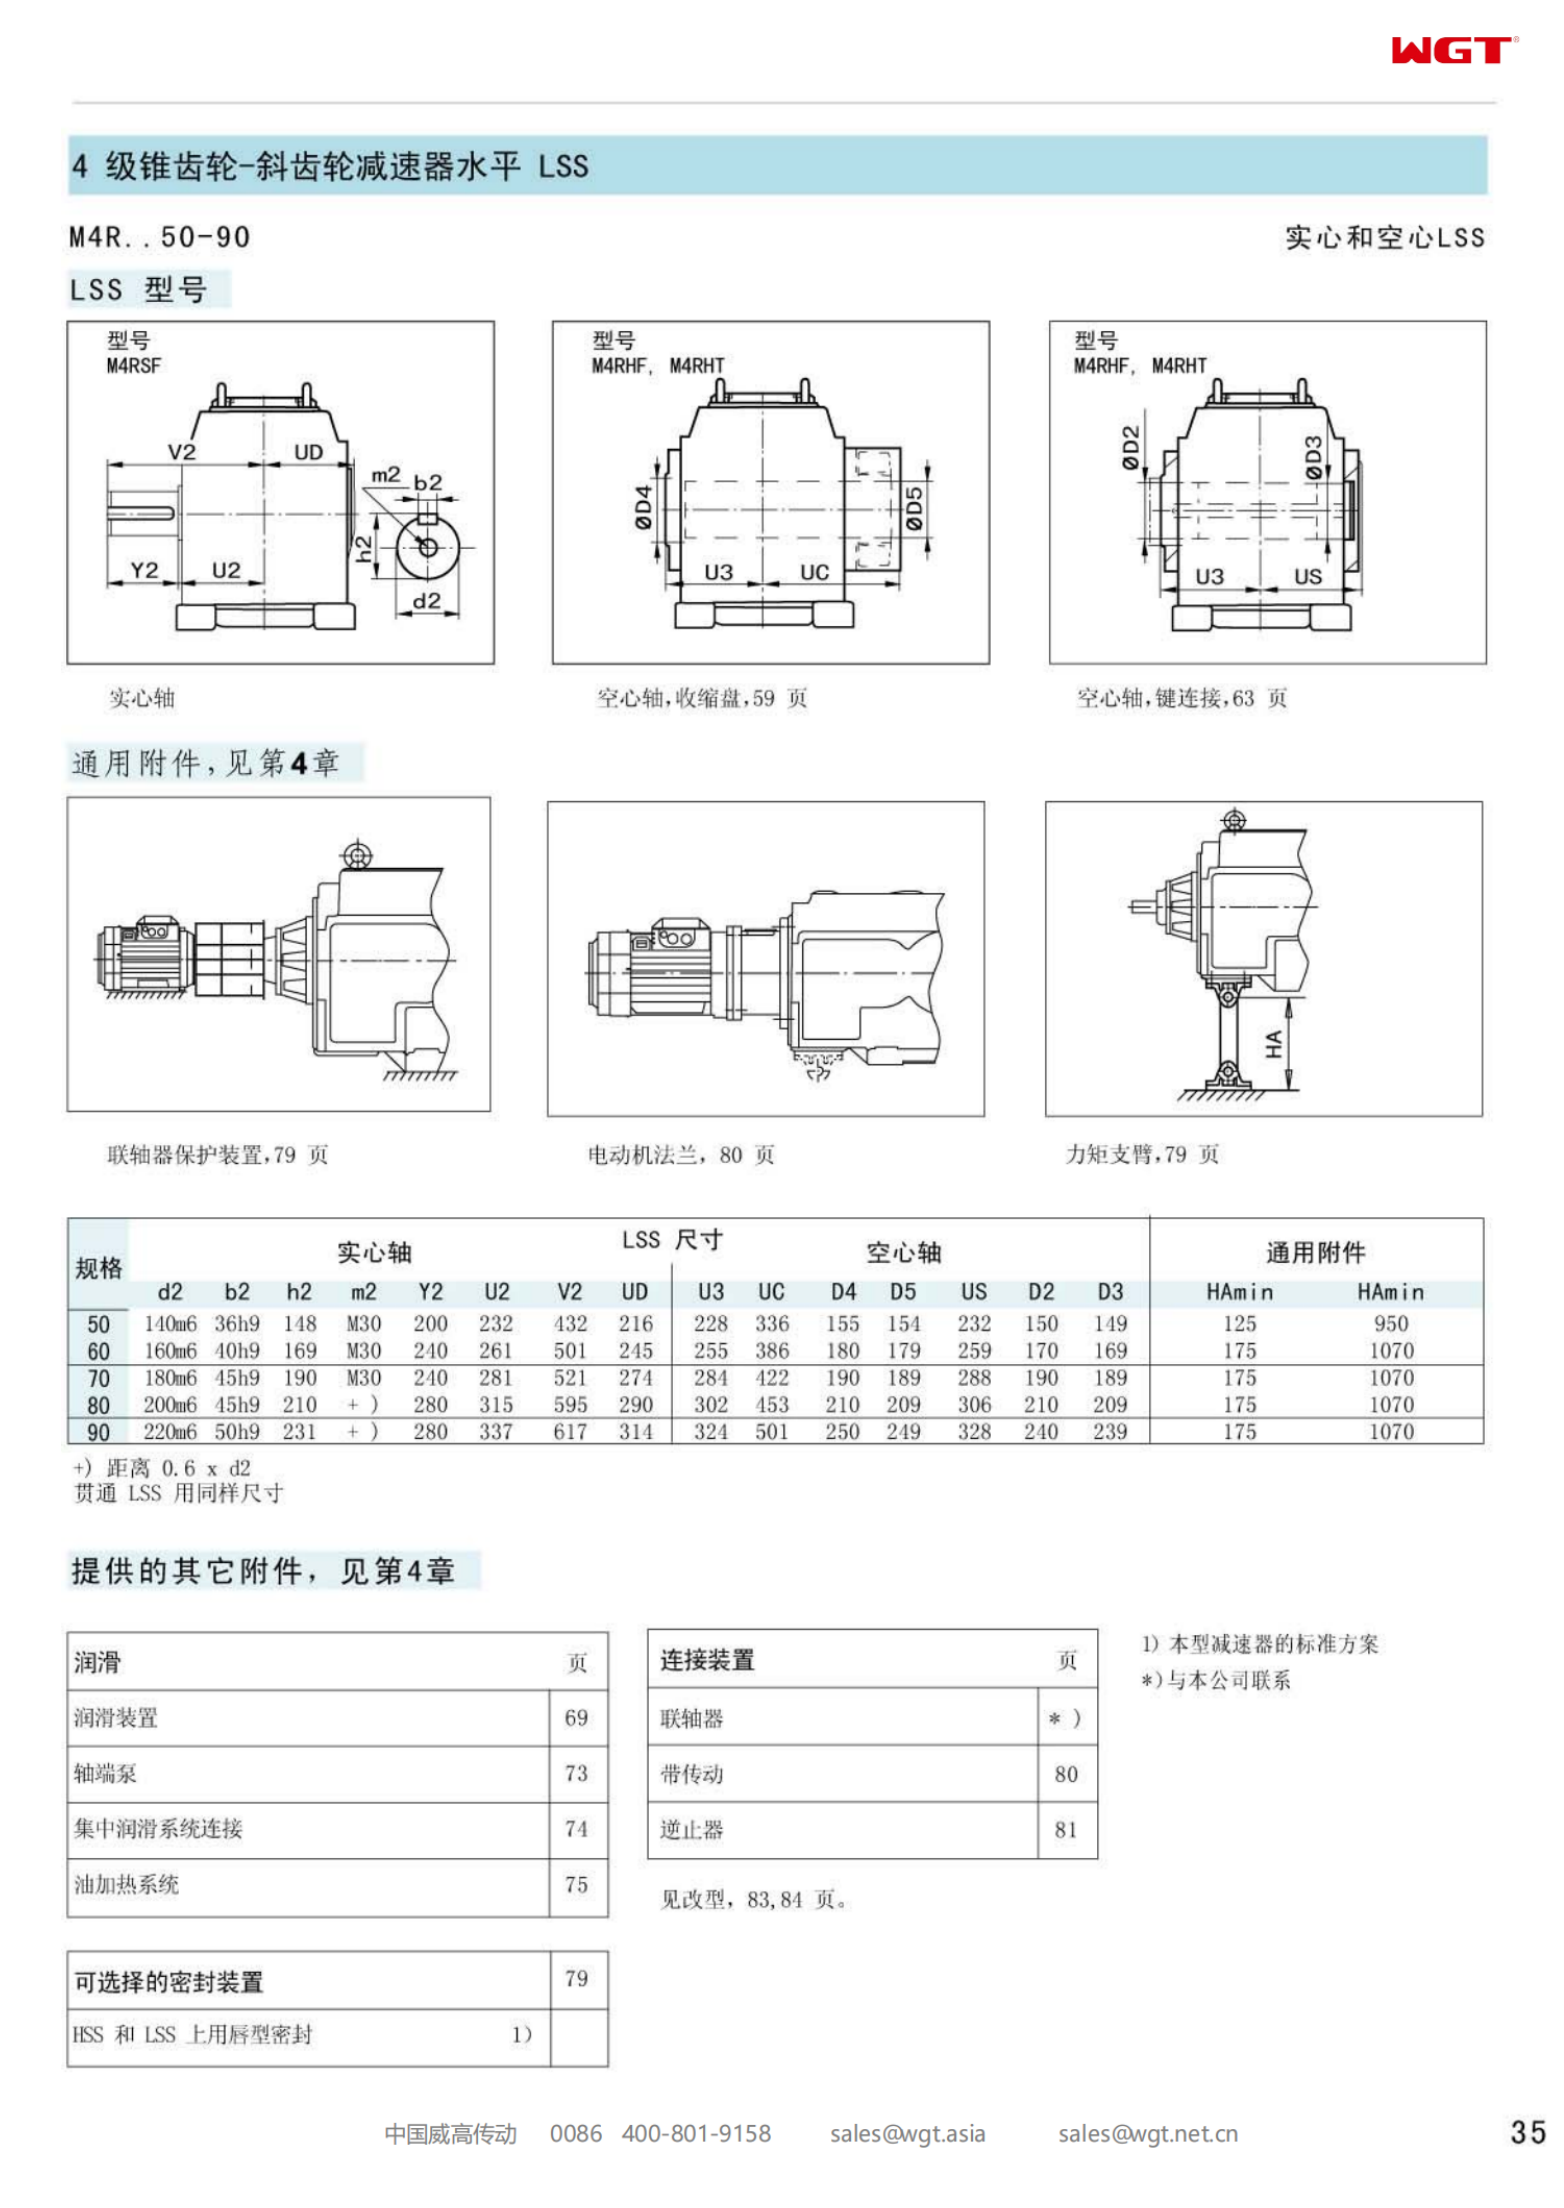 M4RHF90 Replace_SEW_M_Series Gearbox